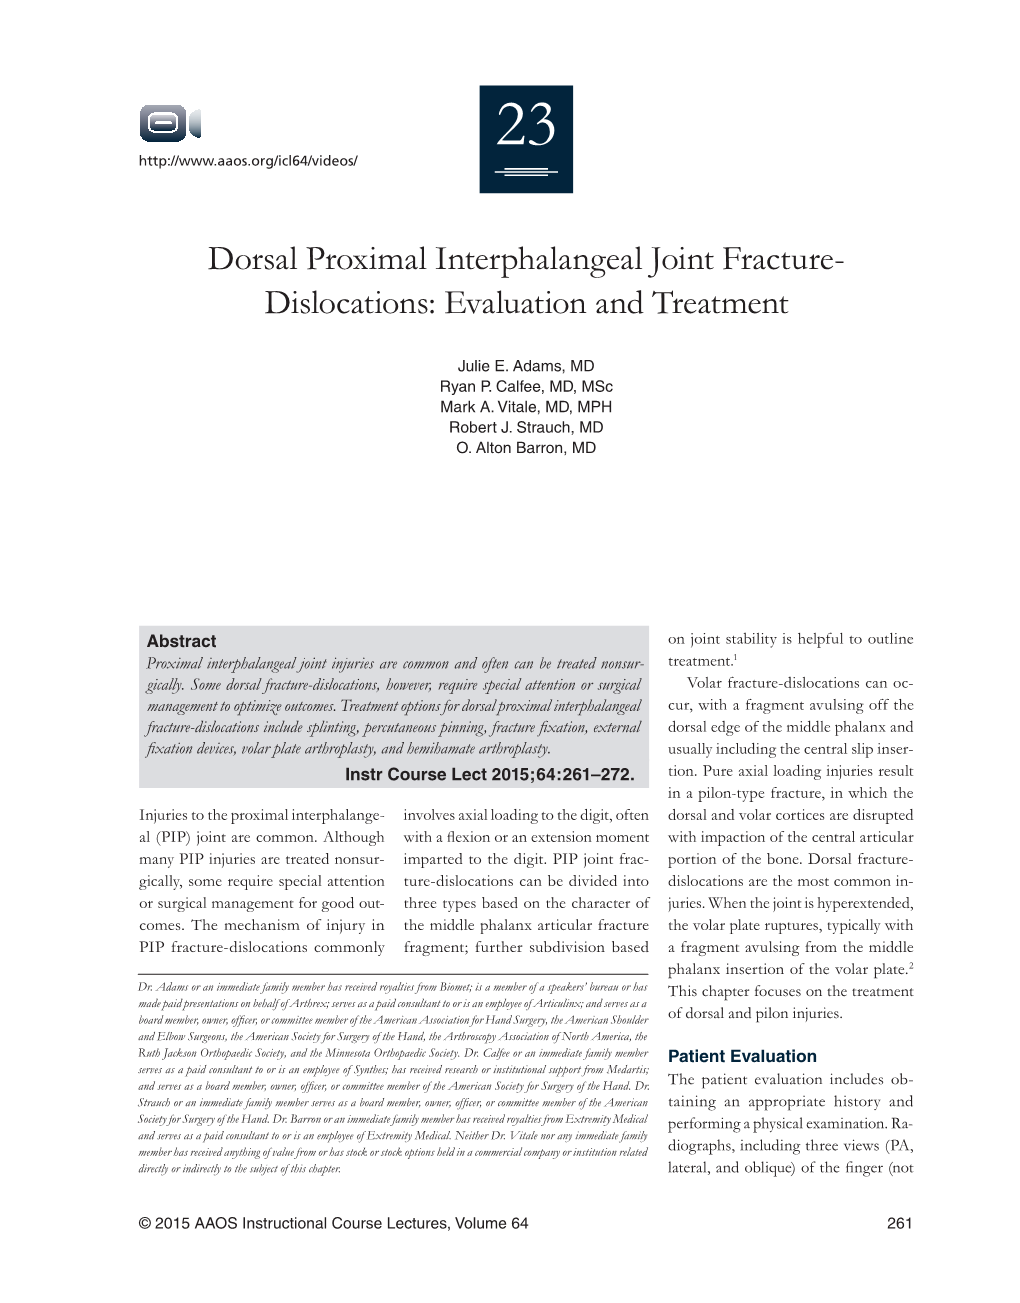 Dorsal Proximal Interphalangeal Joint Fracture- Dislocations: Evaluation and Treatment